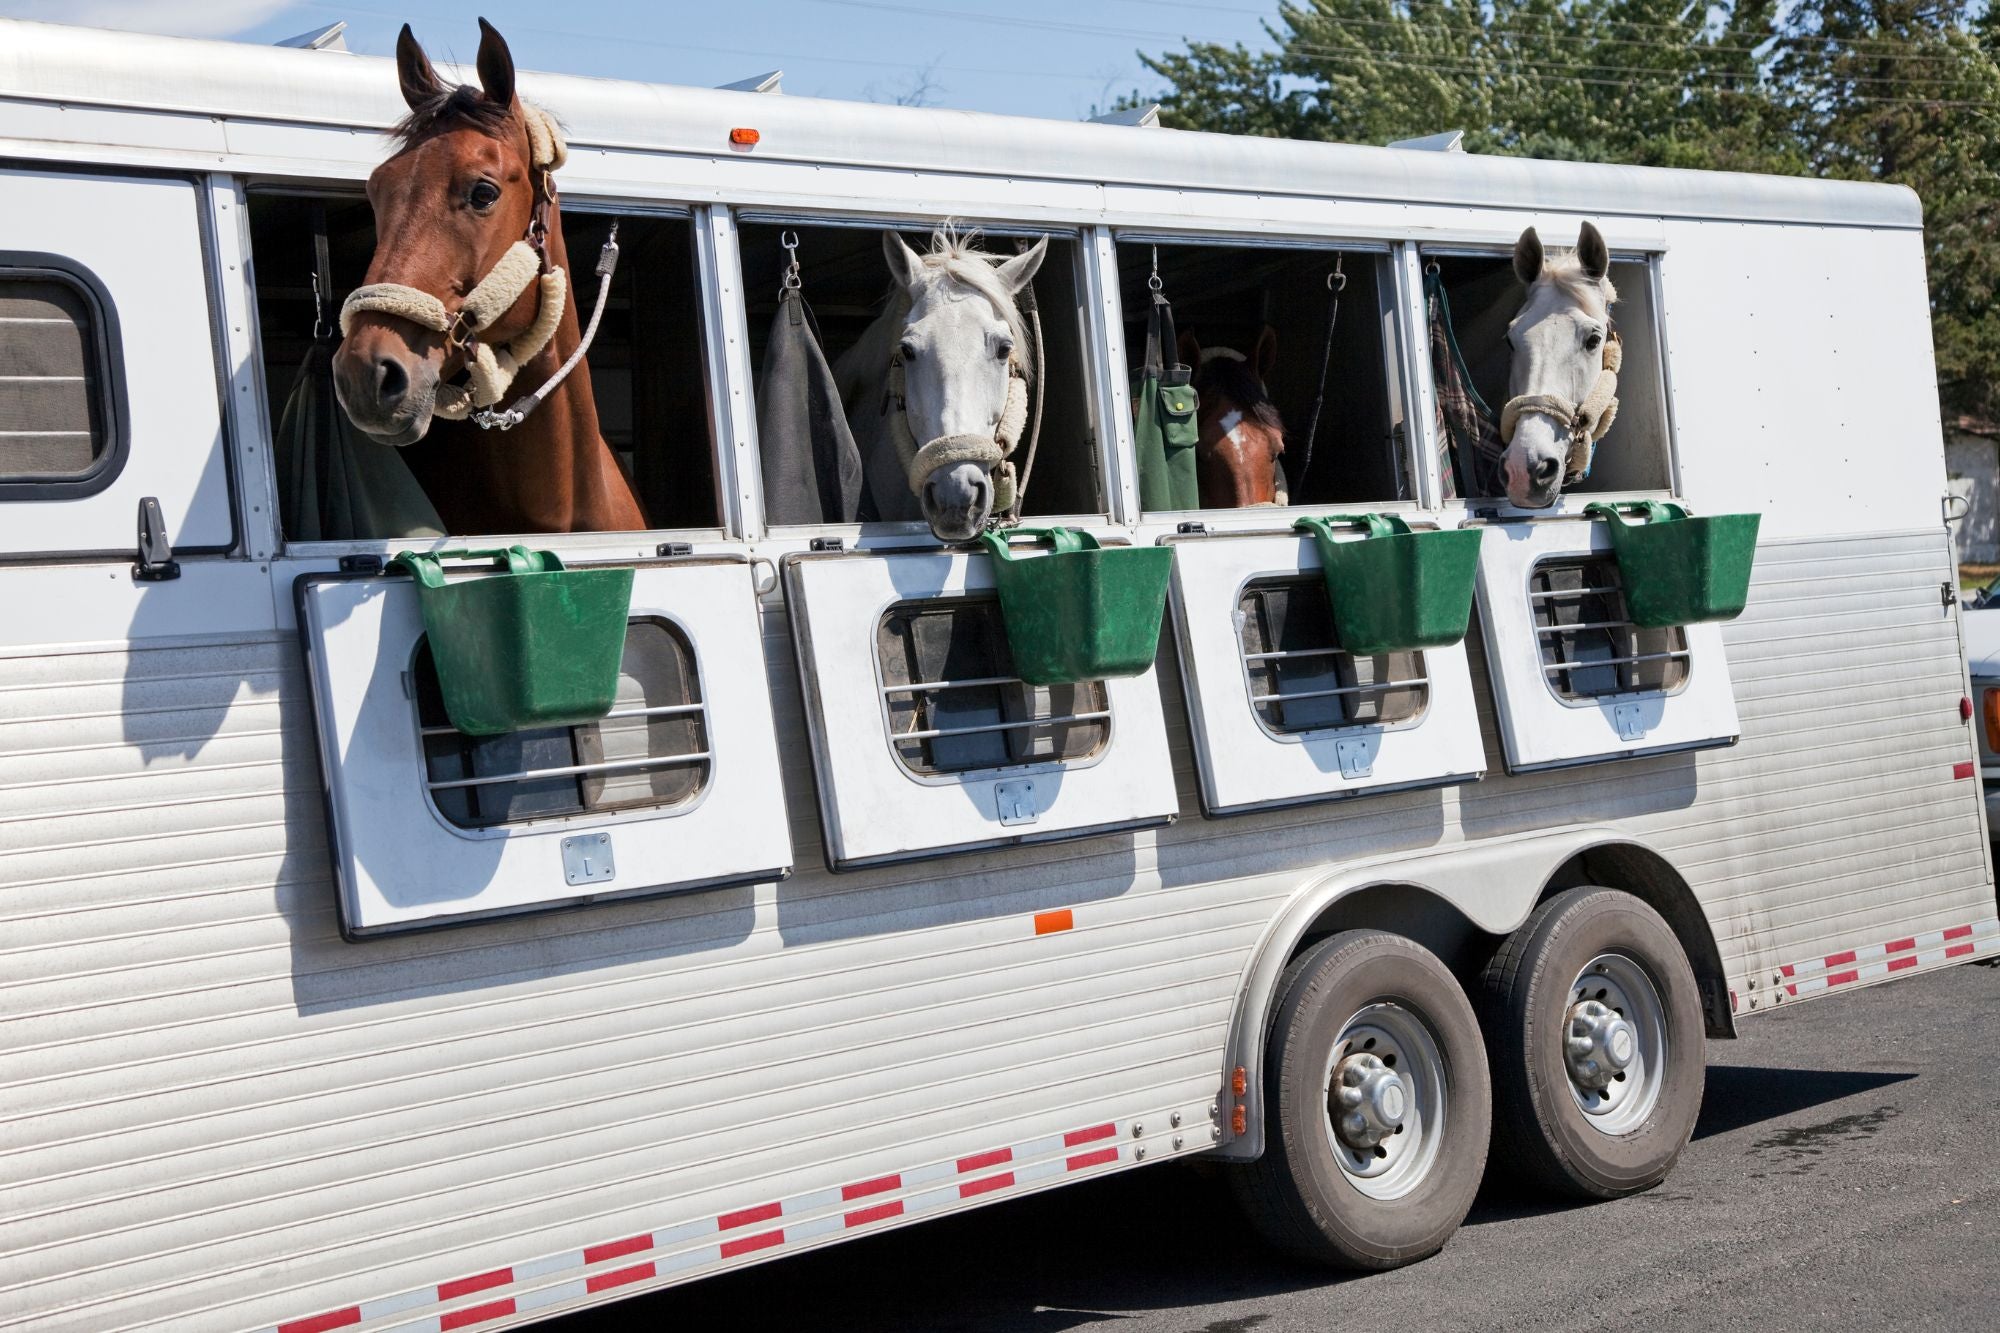 Hit the Road with Confidence: How to Safely Pull and Drive a Horse Trailer